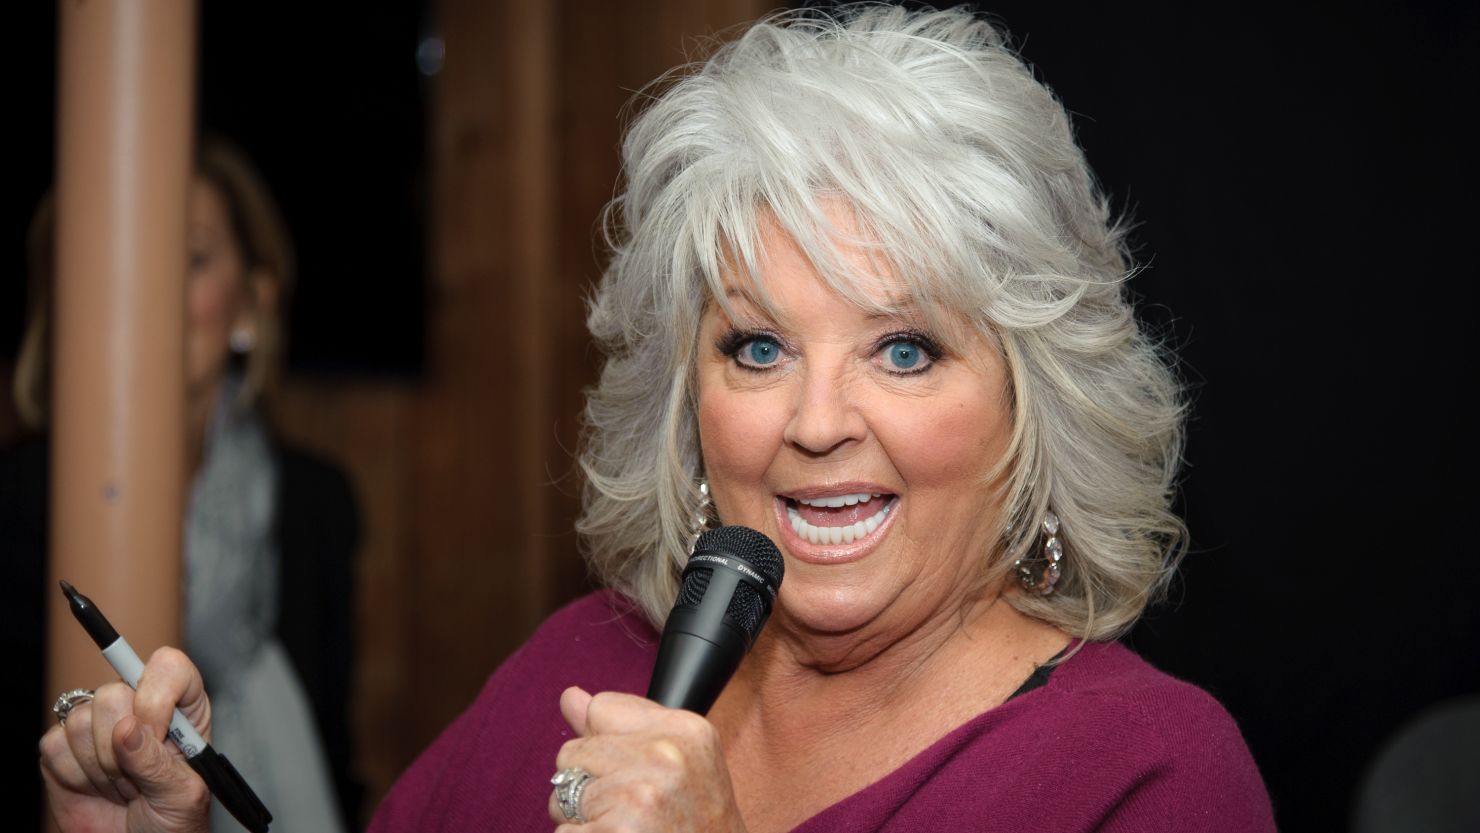 What Really Happened To Paula Deen?